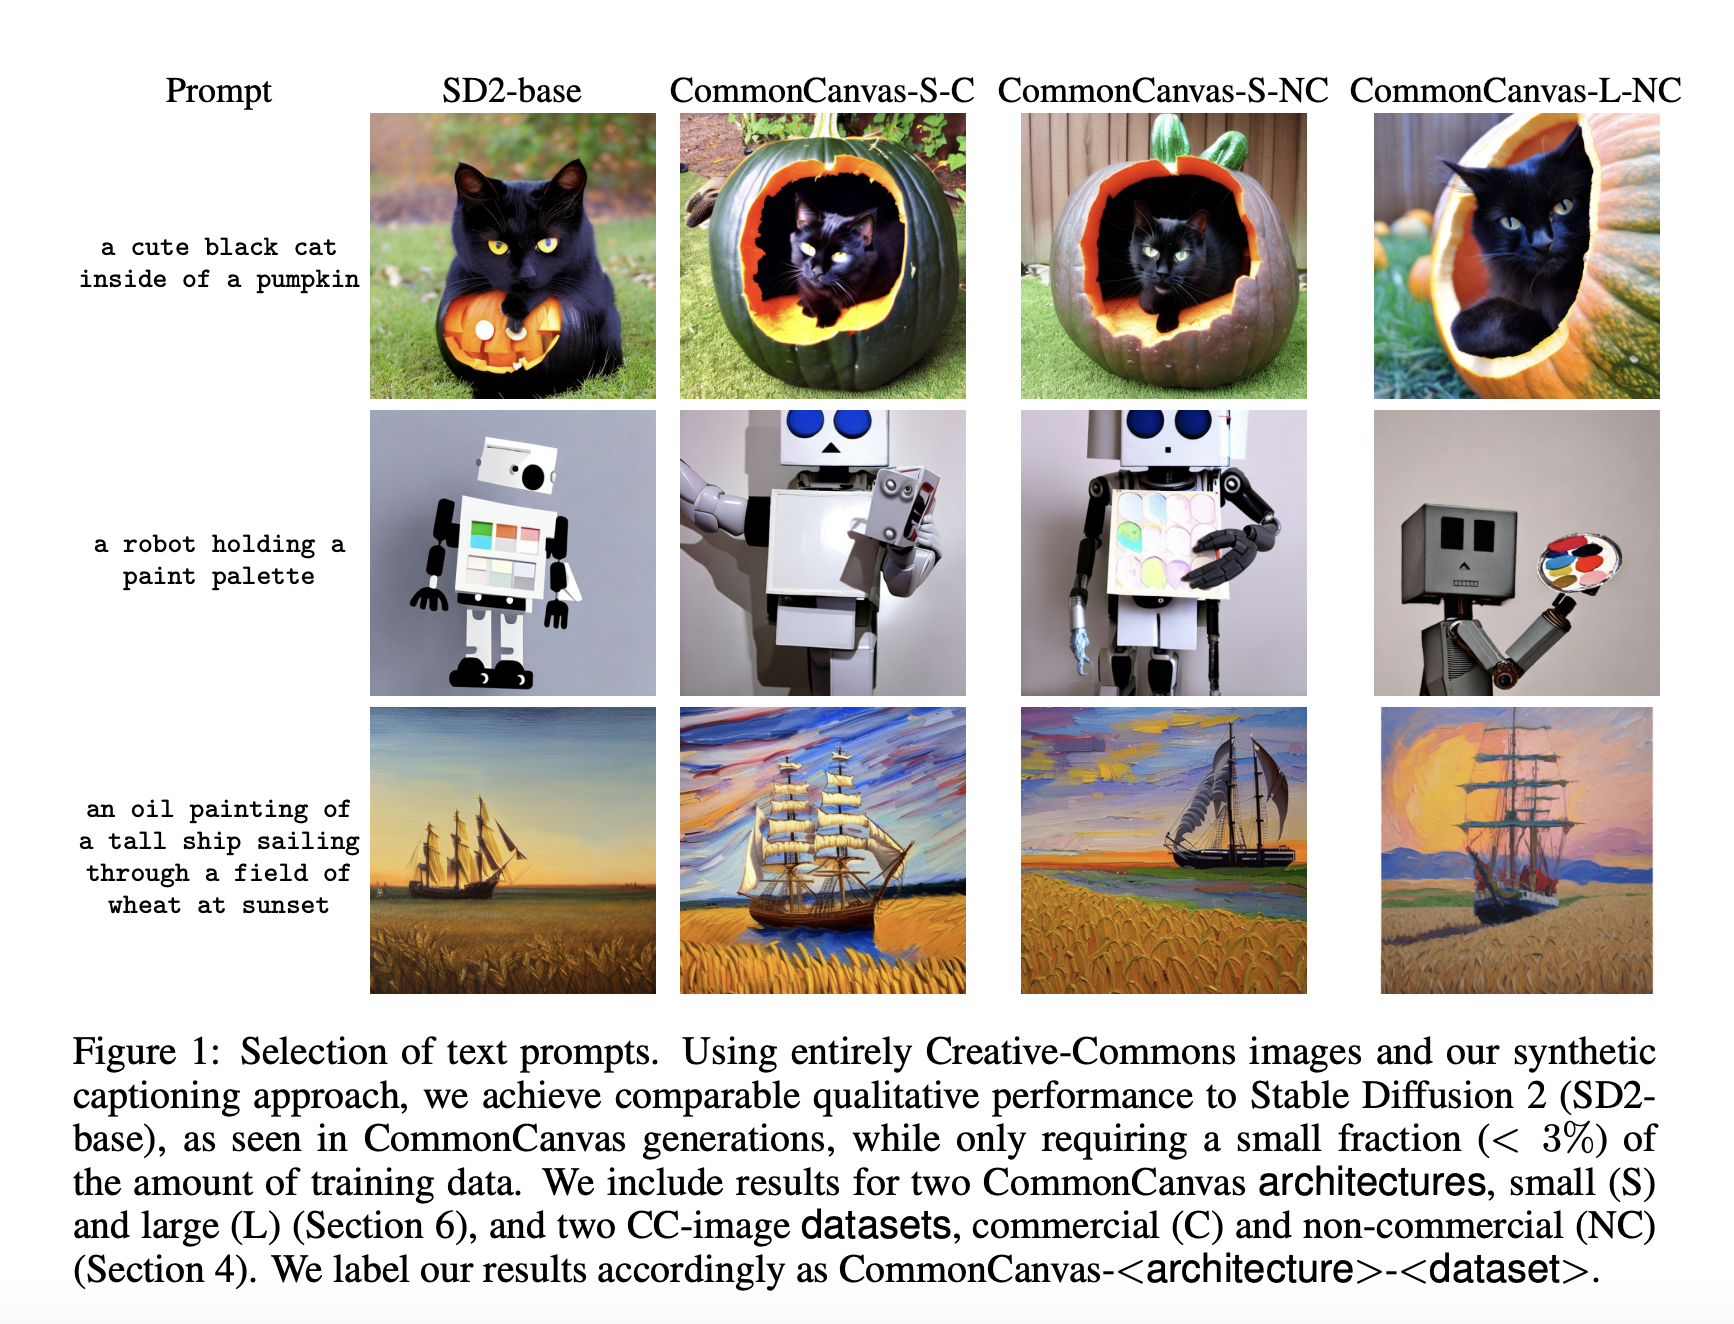 Meet CommonCanvas: An Open Diffusion Model That Has Been Trained Using Creative-Commons Images